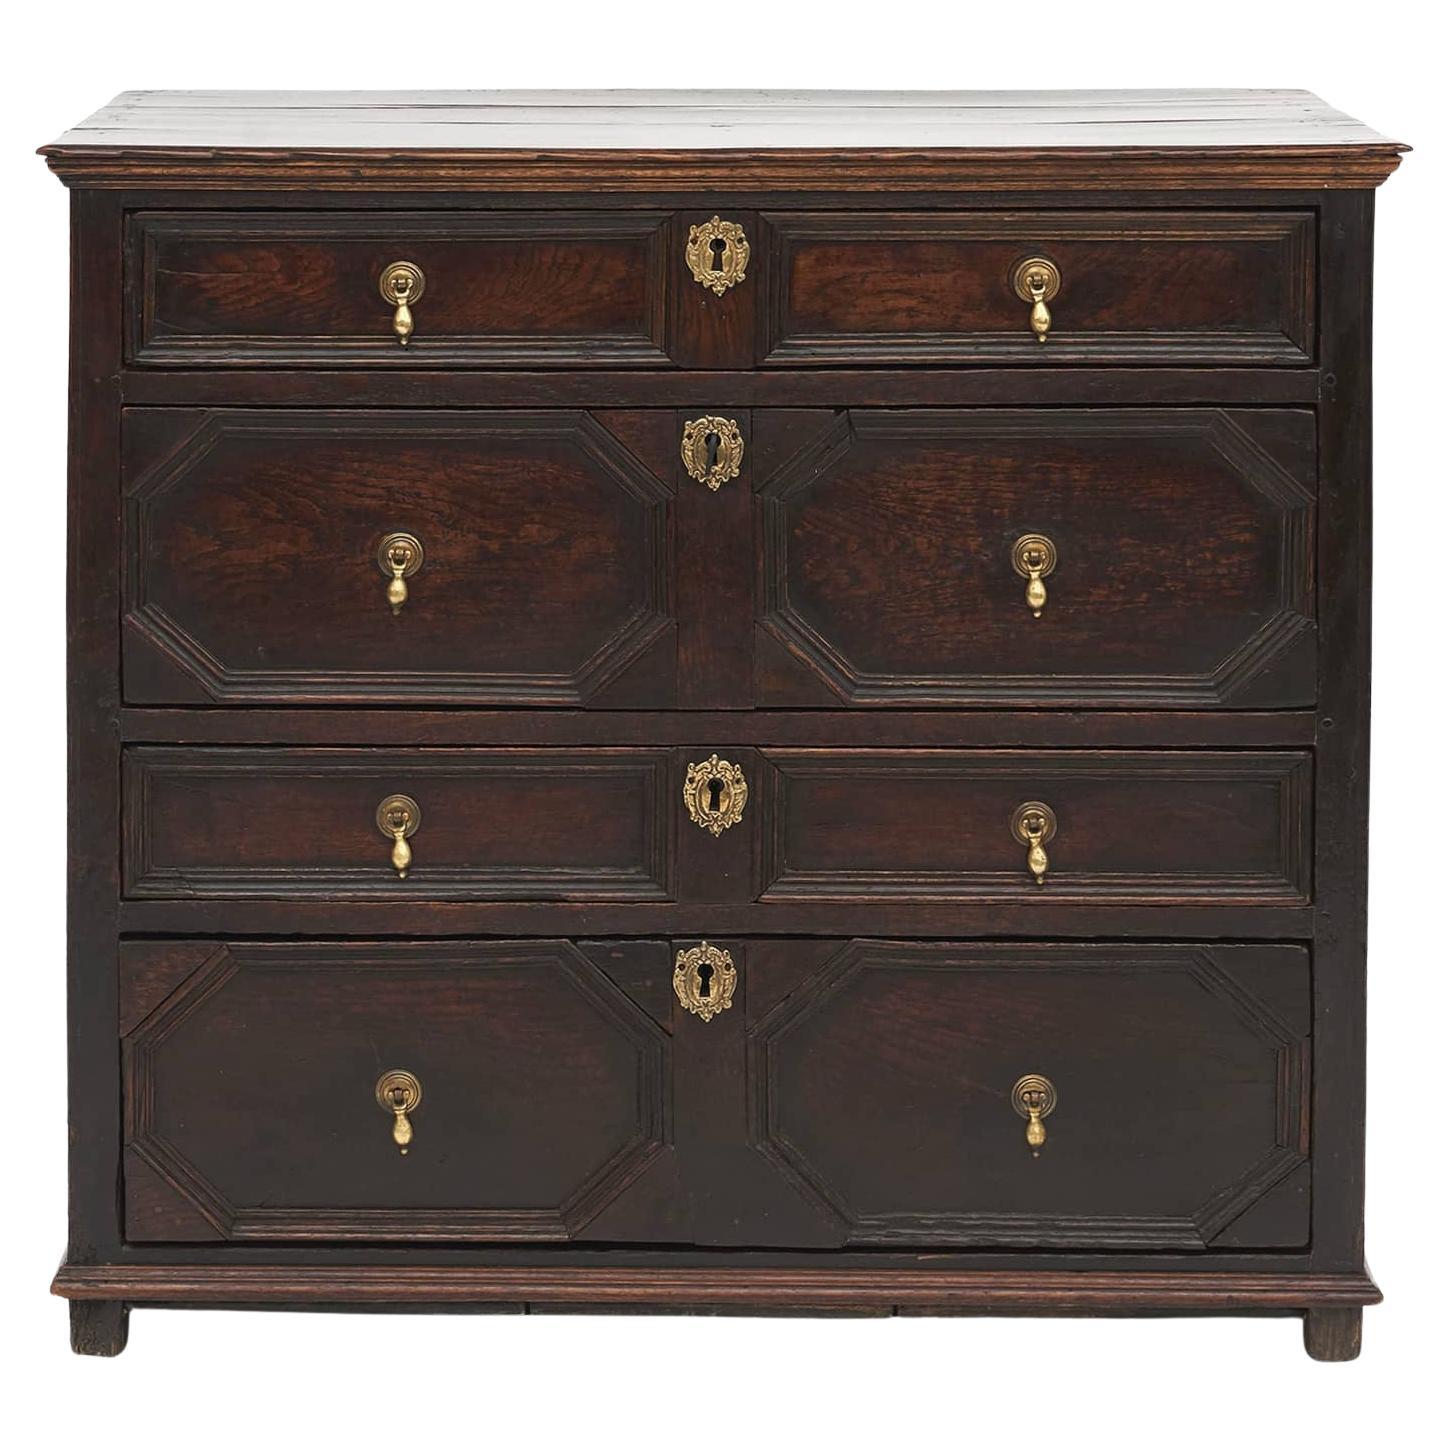 George I Chest of Drawers in Oak, England 1680-1700